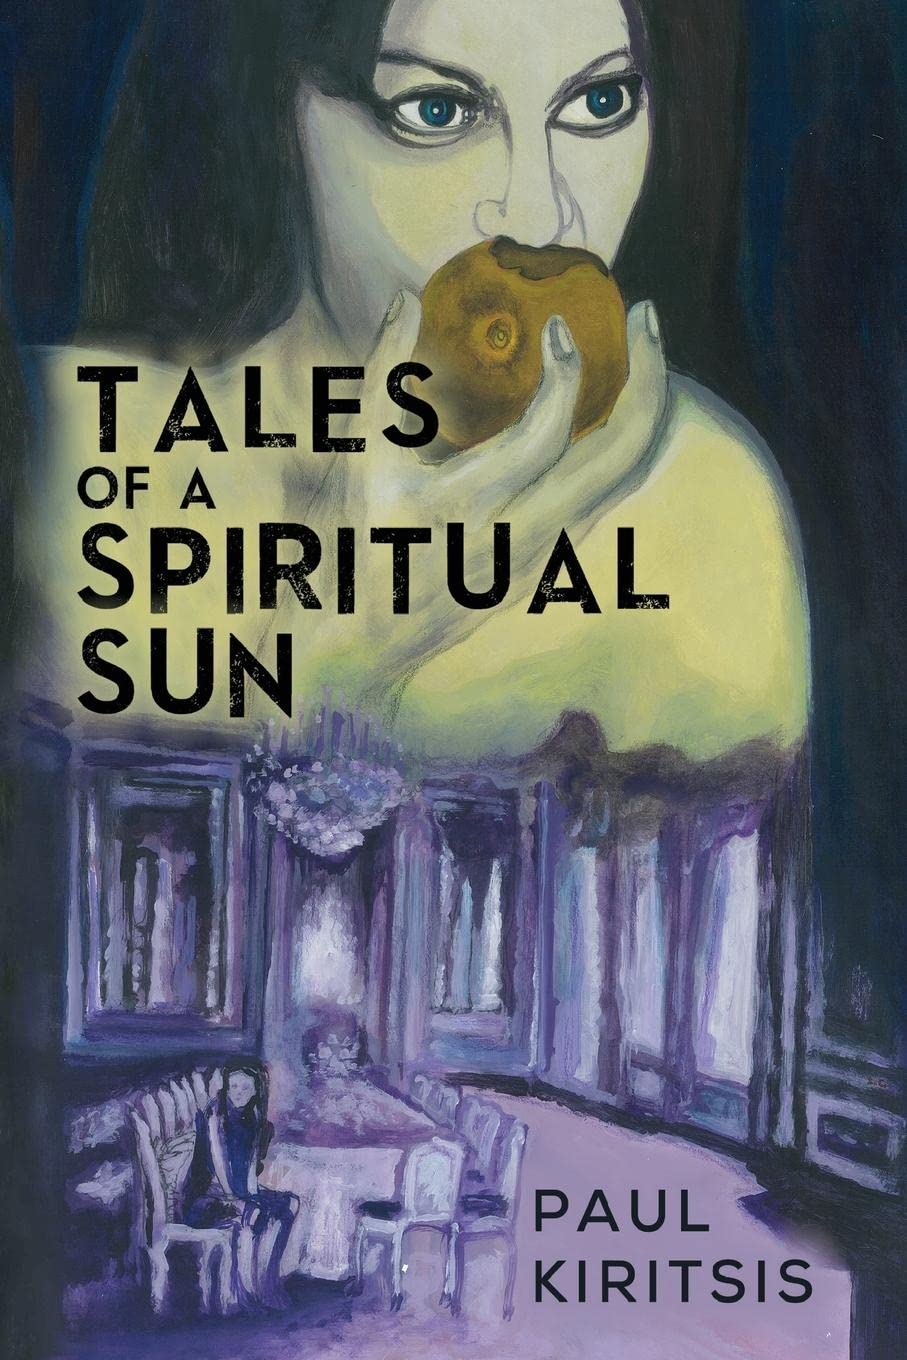 The front cover of Tales of a Spiritual Sun by Paul Kiritsis